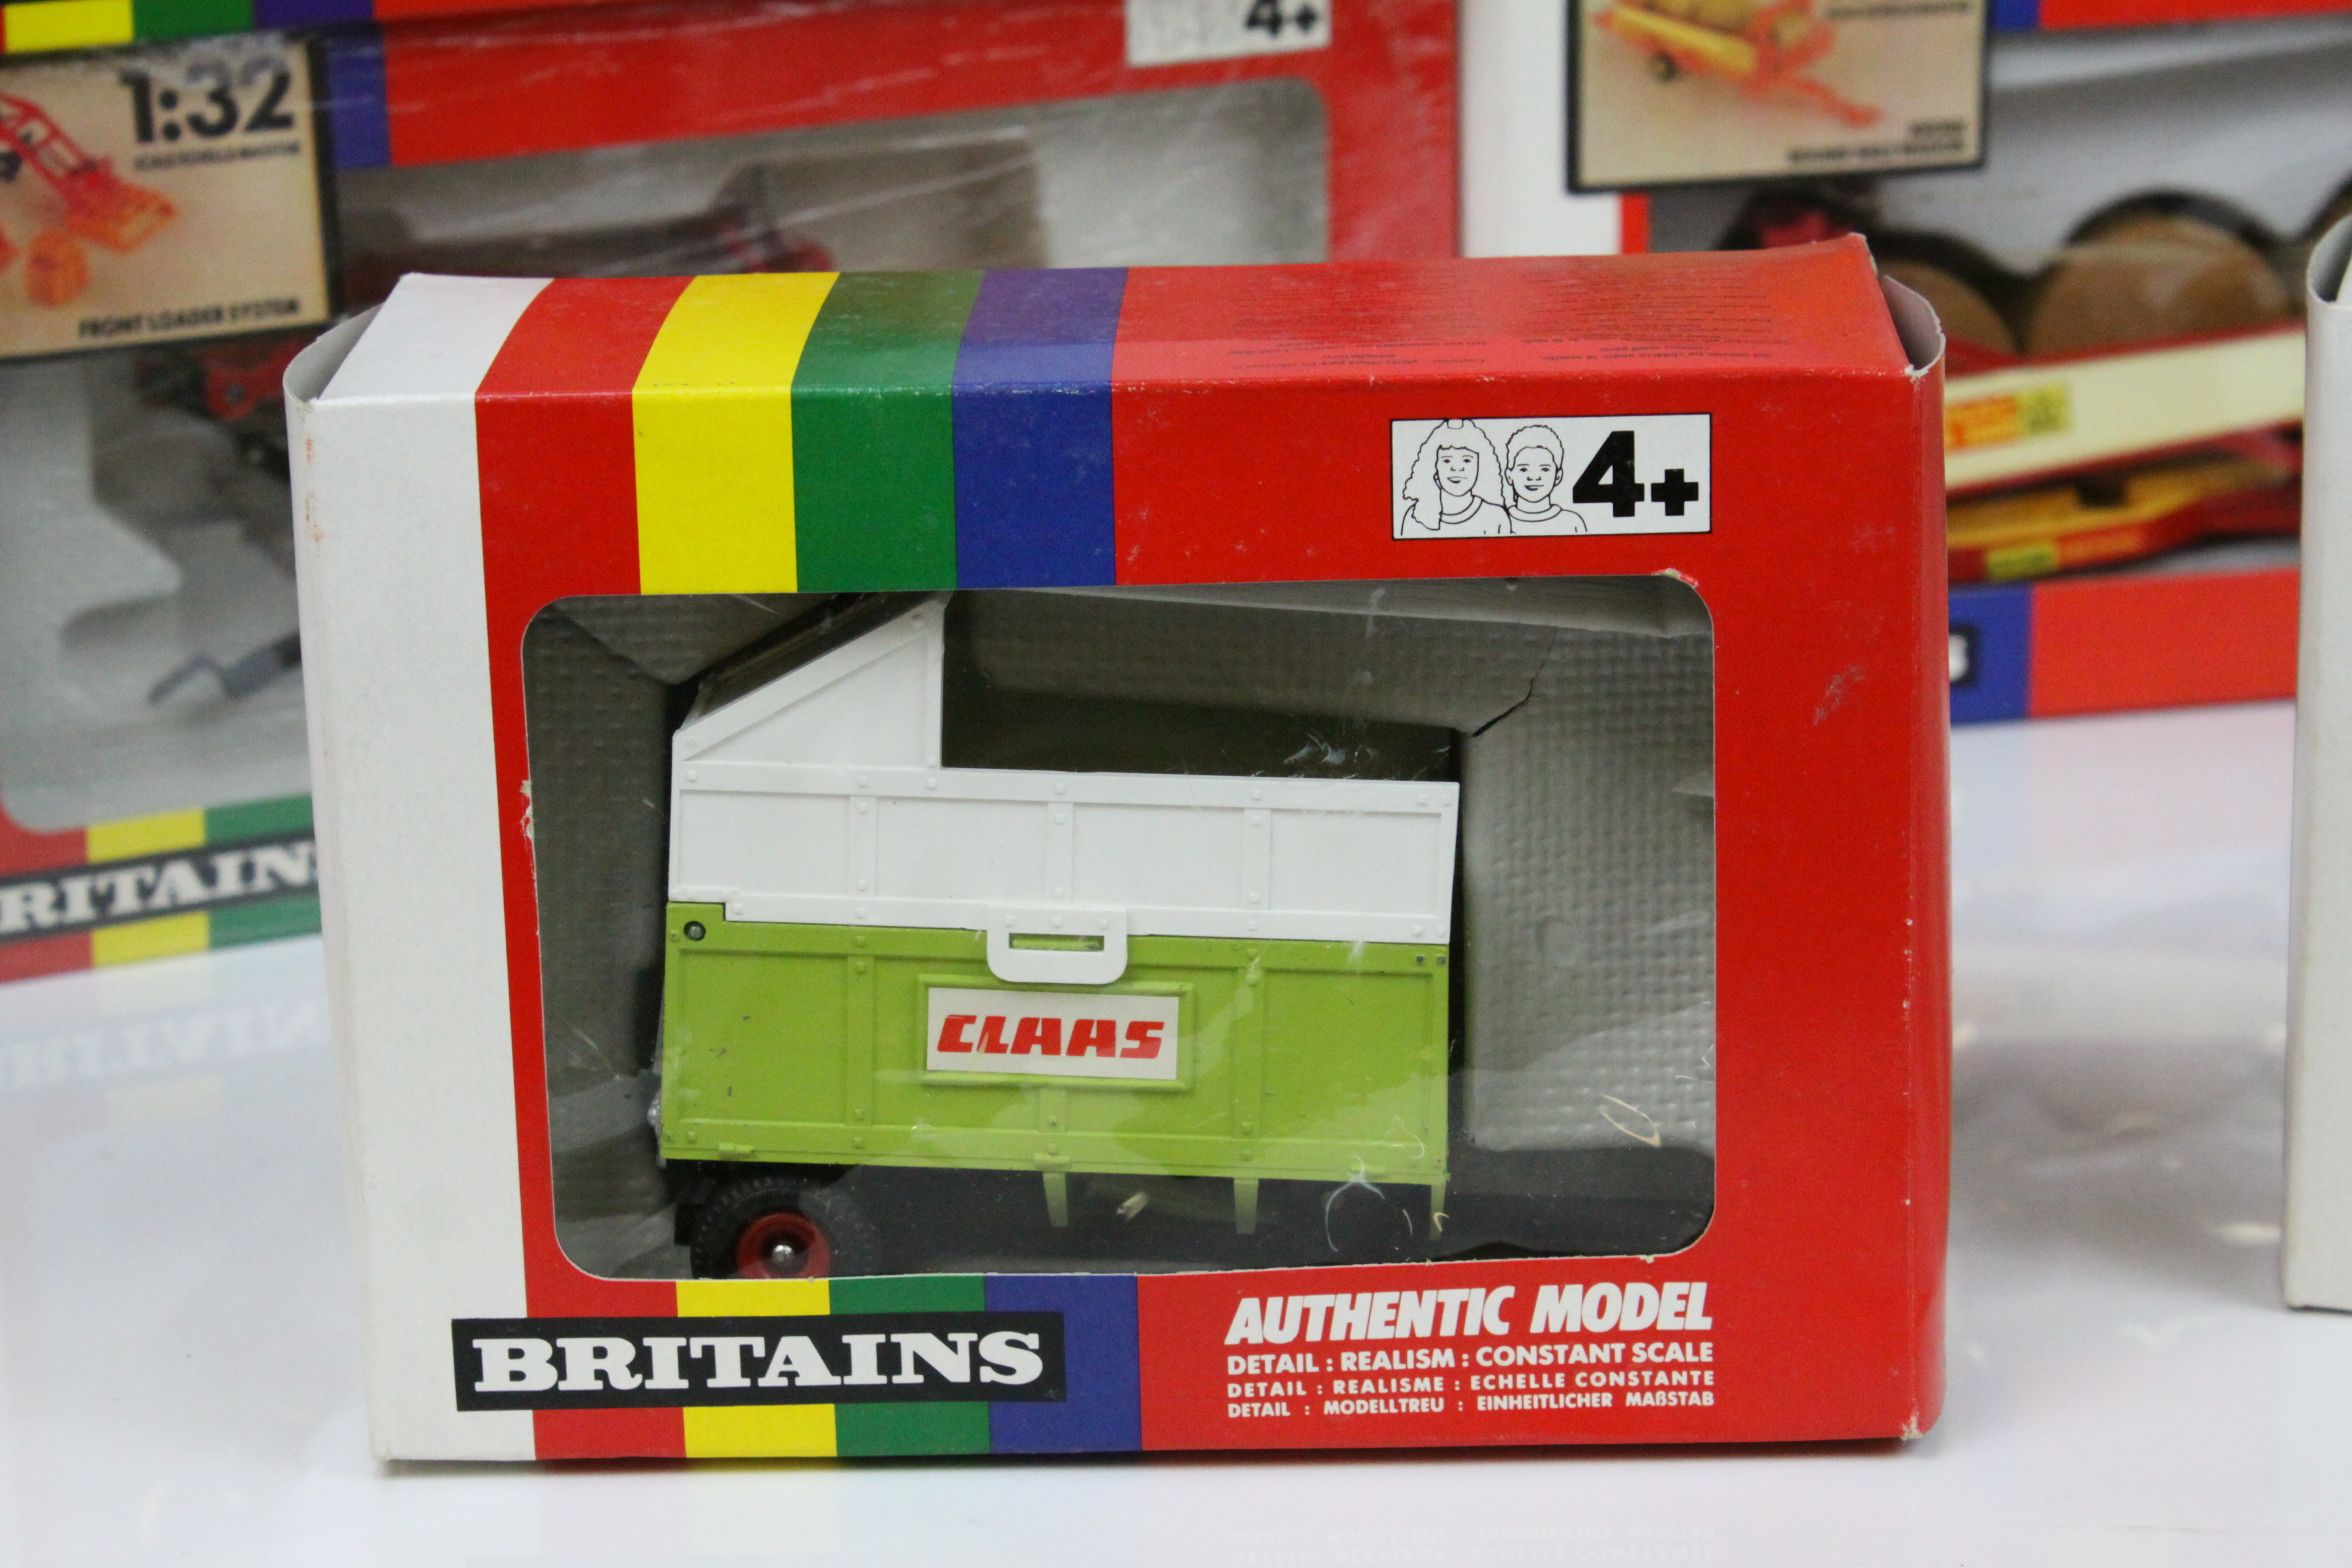 16 Boxed 1:32 Britains farming models to include 9566, 9559, 9539, 9548, 9547, 9574, 9509, 9519, - Image 11 of 27